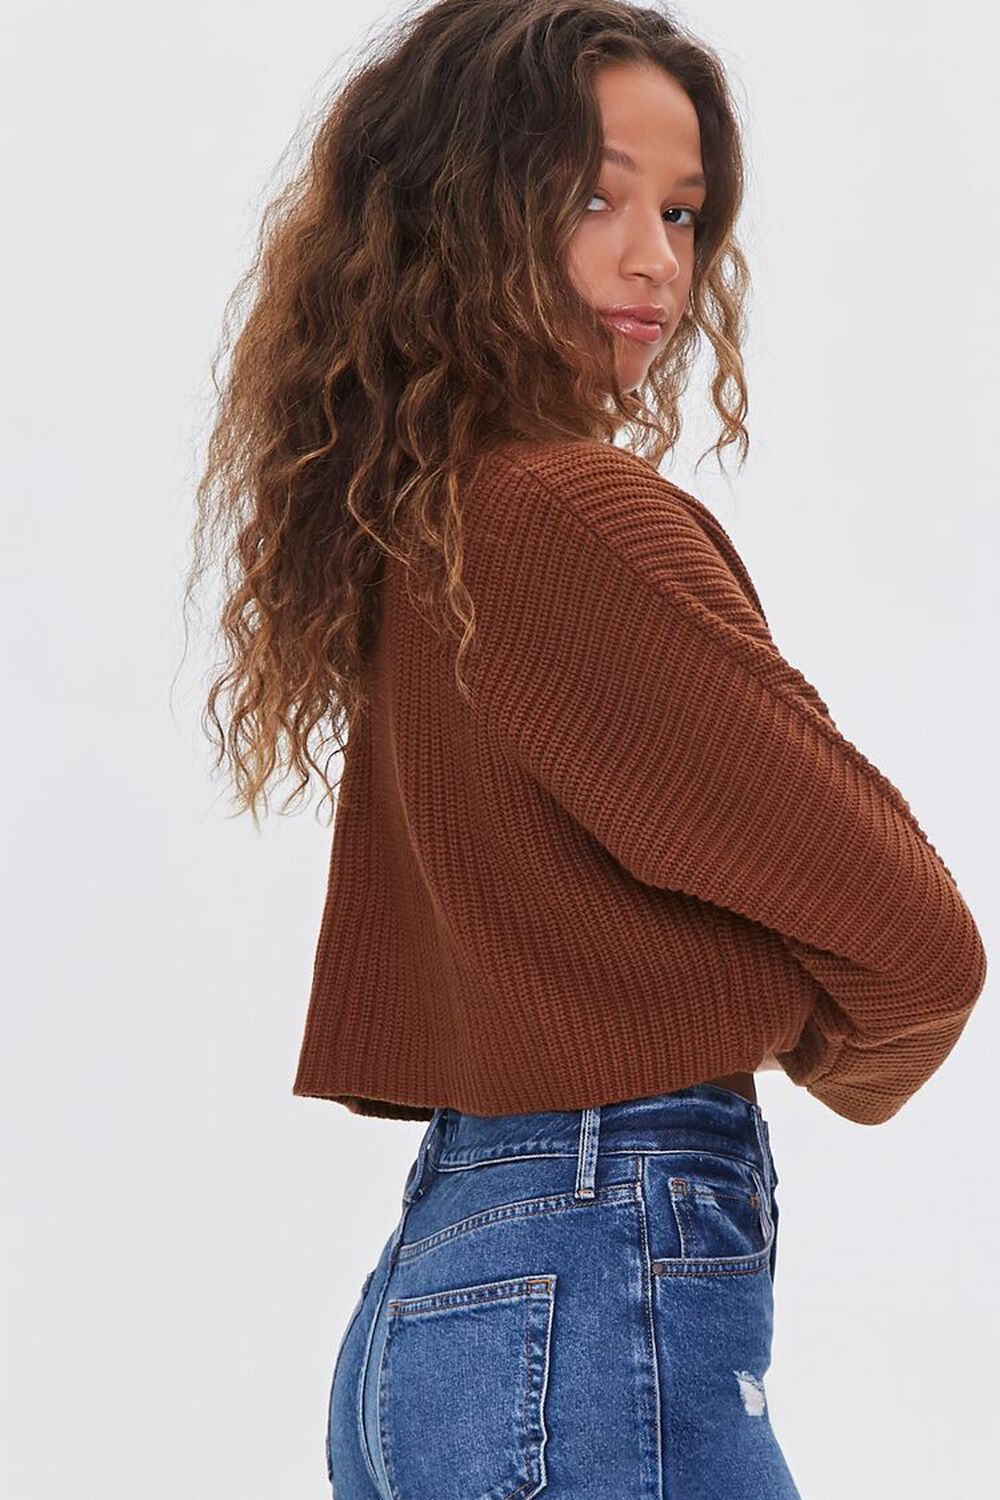 BROWN Ribbed Cropped Cardigan Sweater, image 2